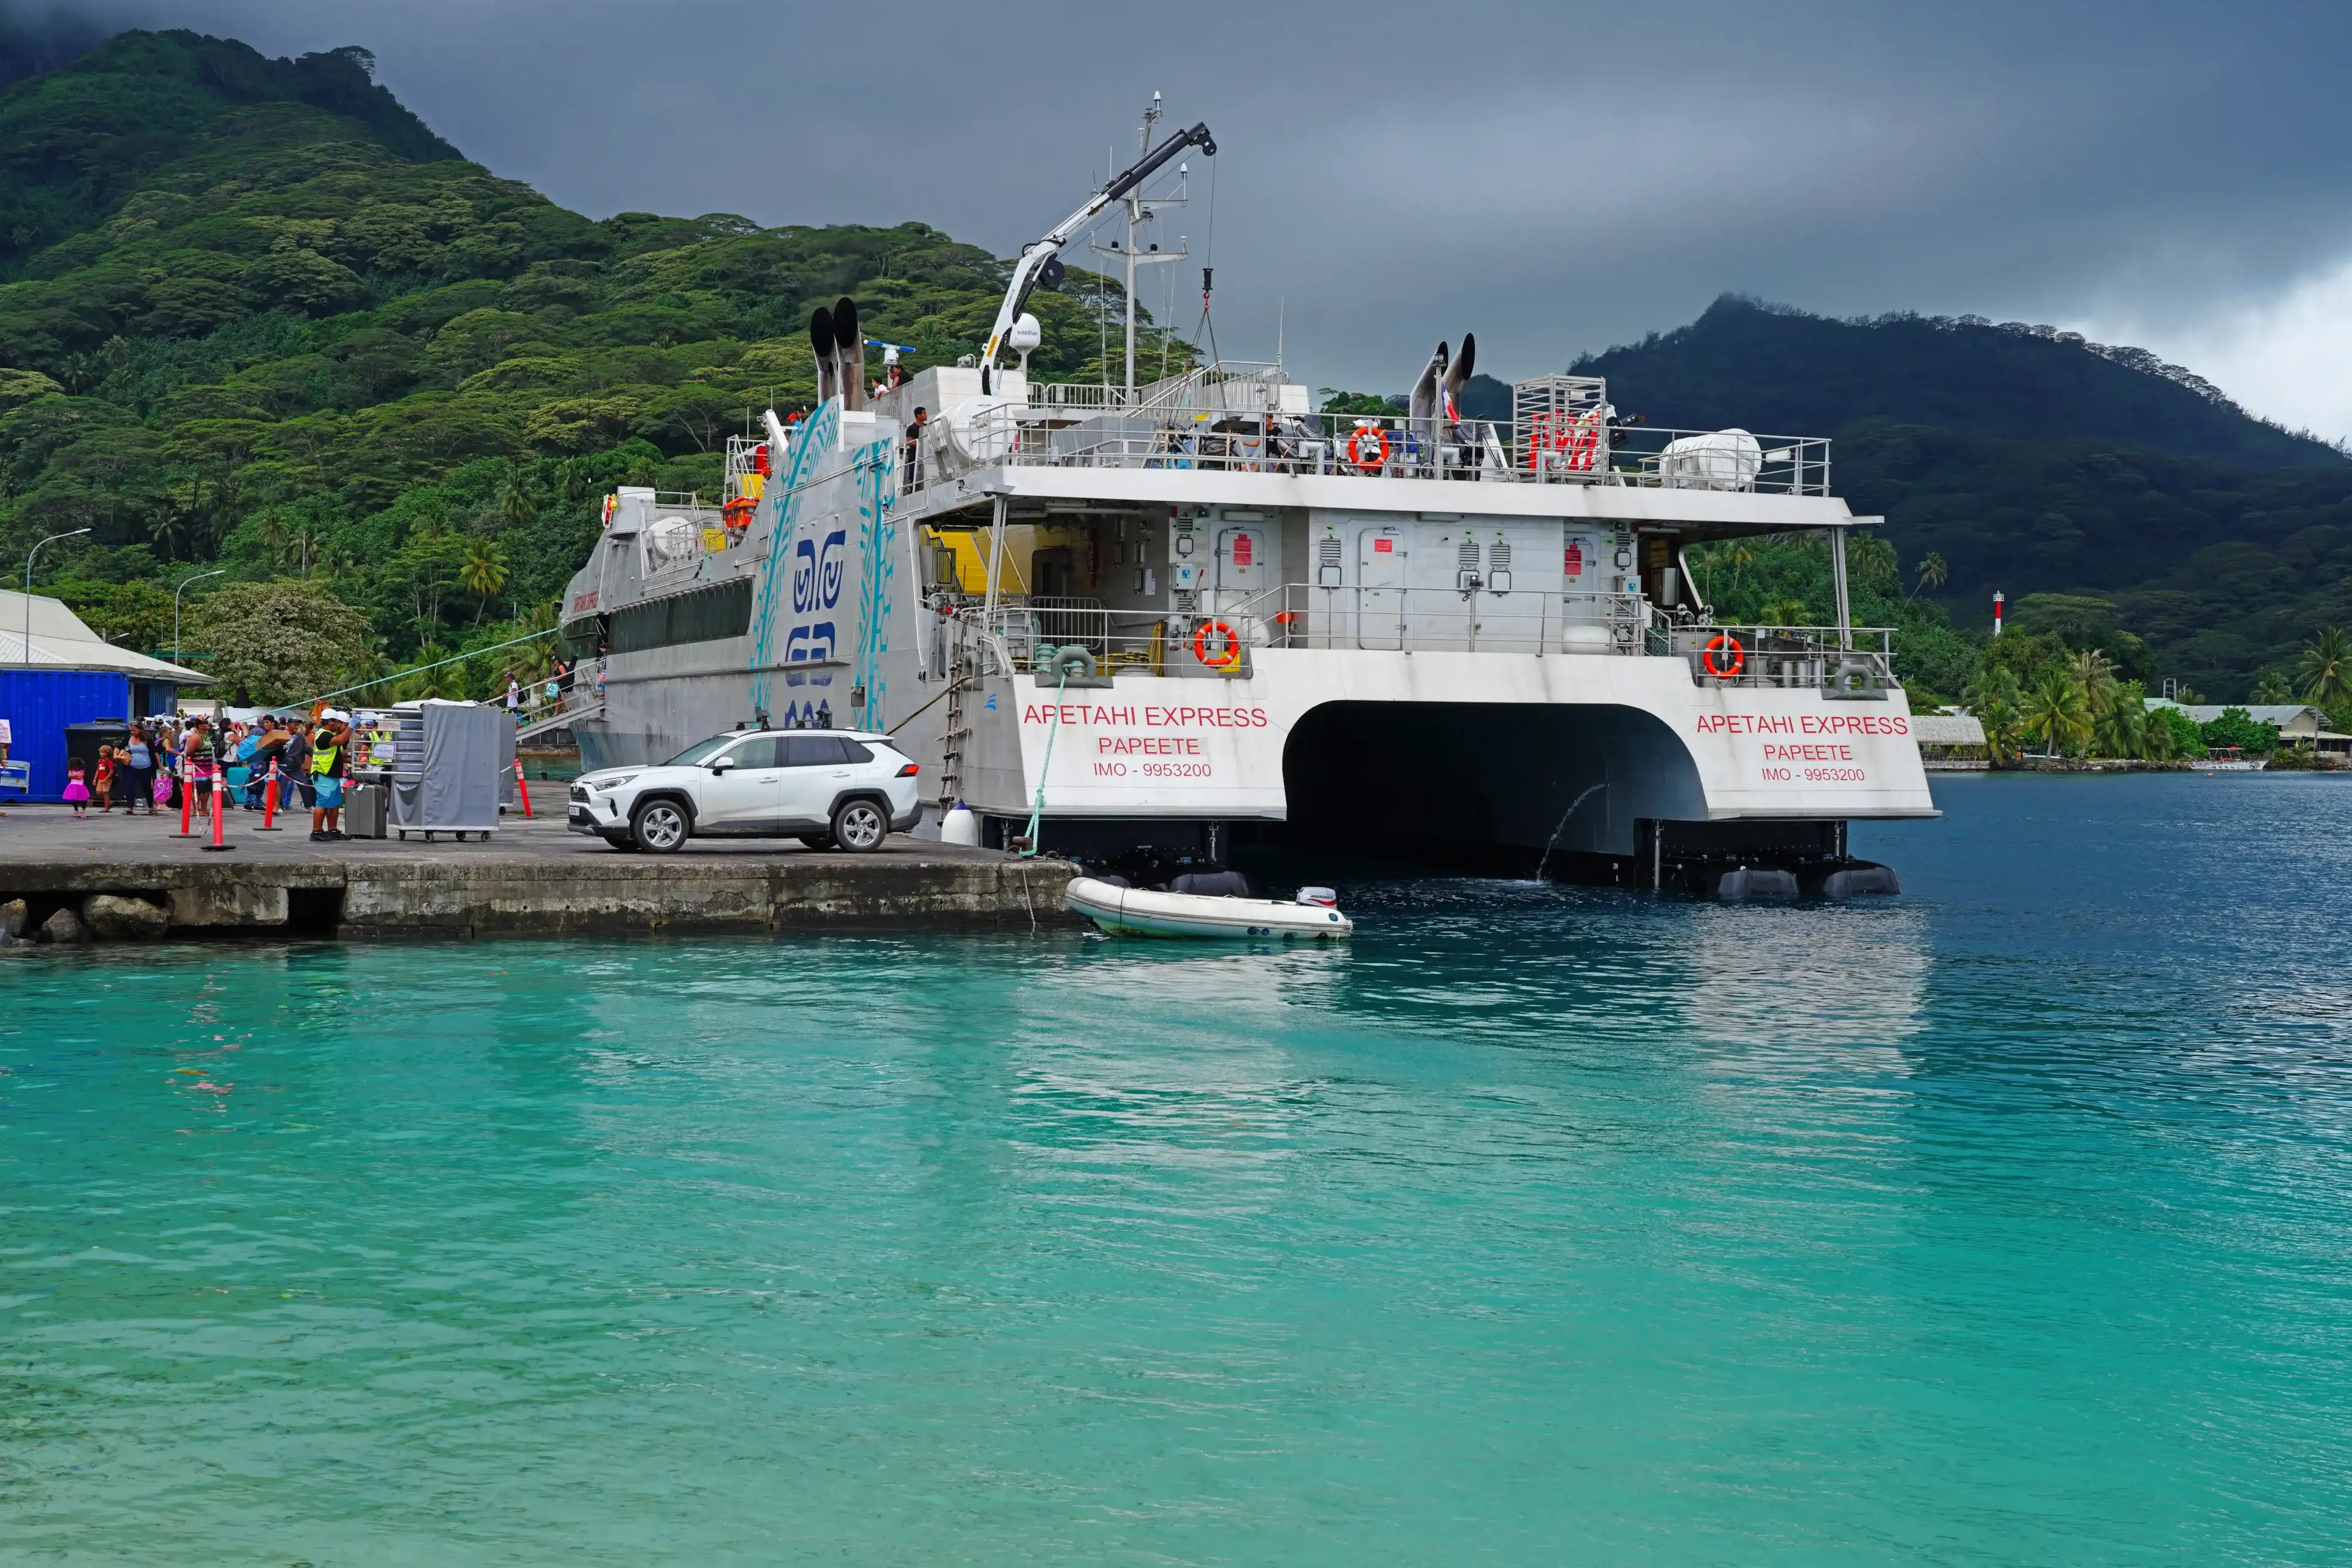 HUAHINE, FRENCH POLYNESIA – 5 DEC 2023 – View of the Apetahi Express, a ferry connecting islands in French Polynesia, in the Fare harbor, Huahine, Society Islands.